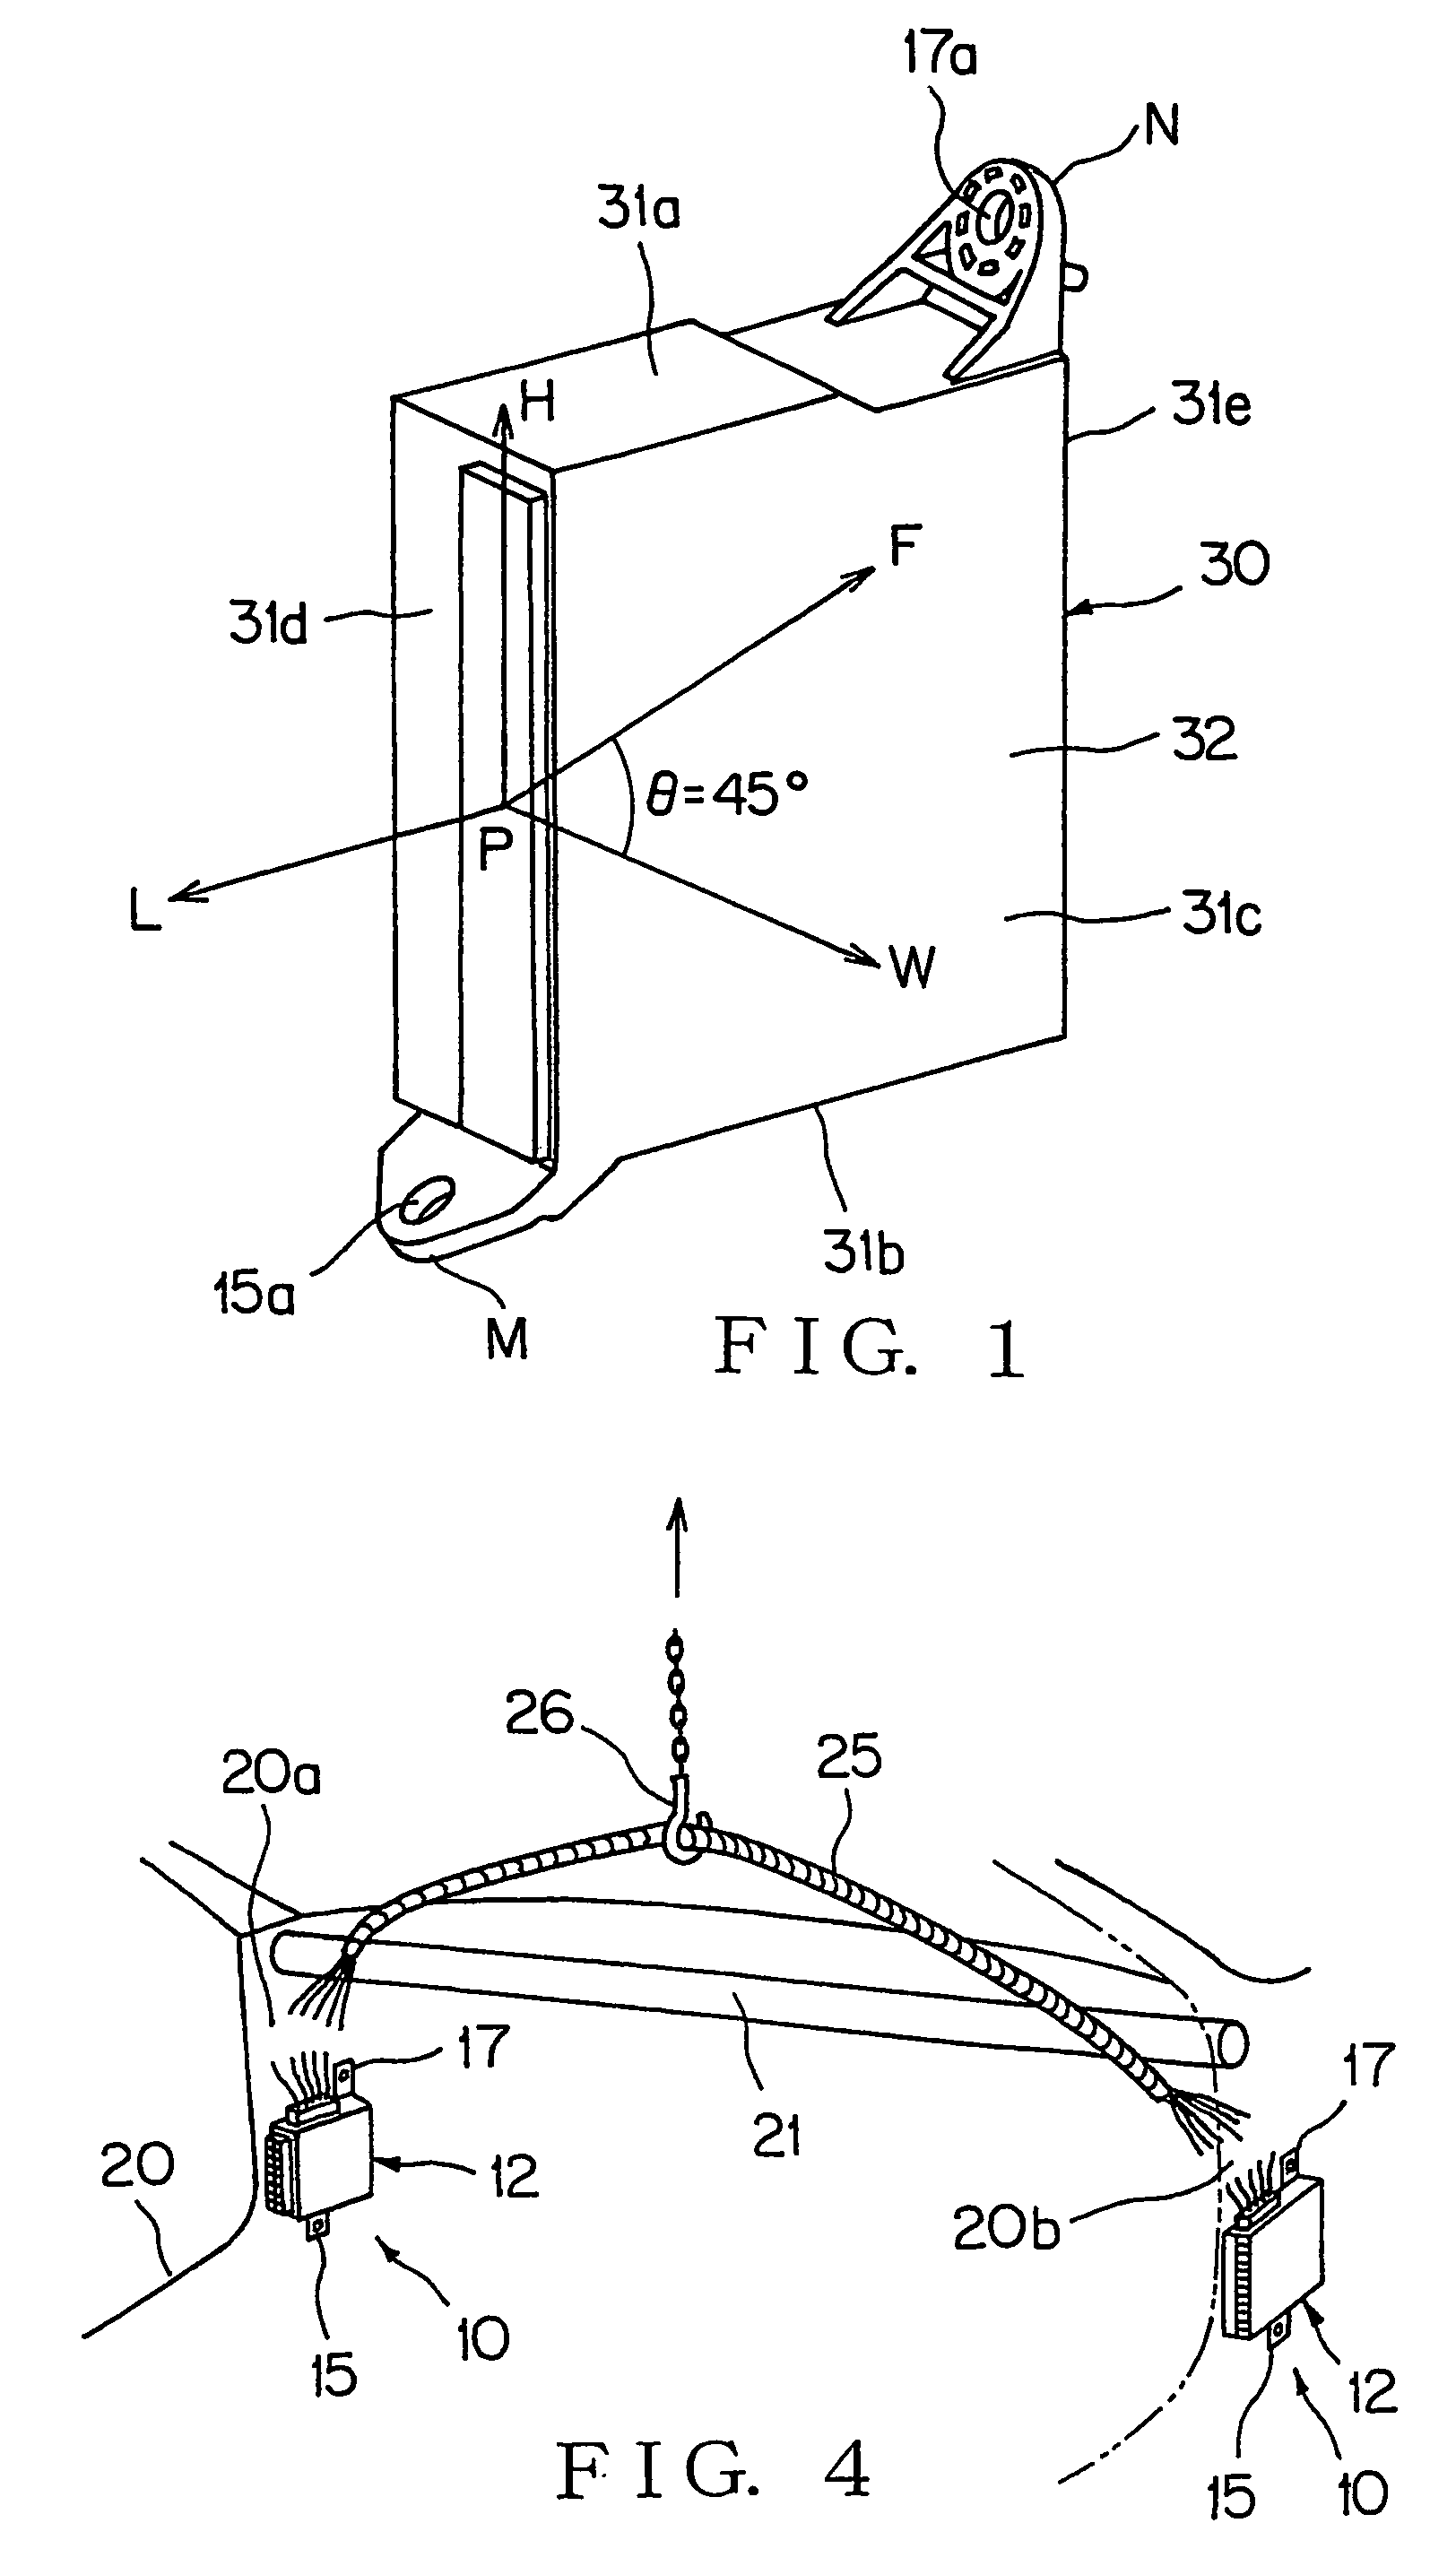 Attachment structure for electric junction box